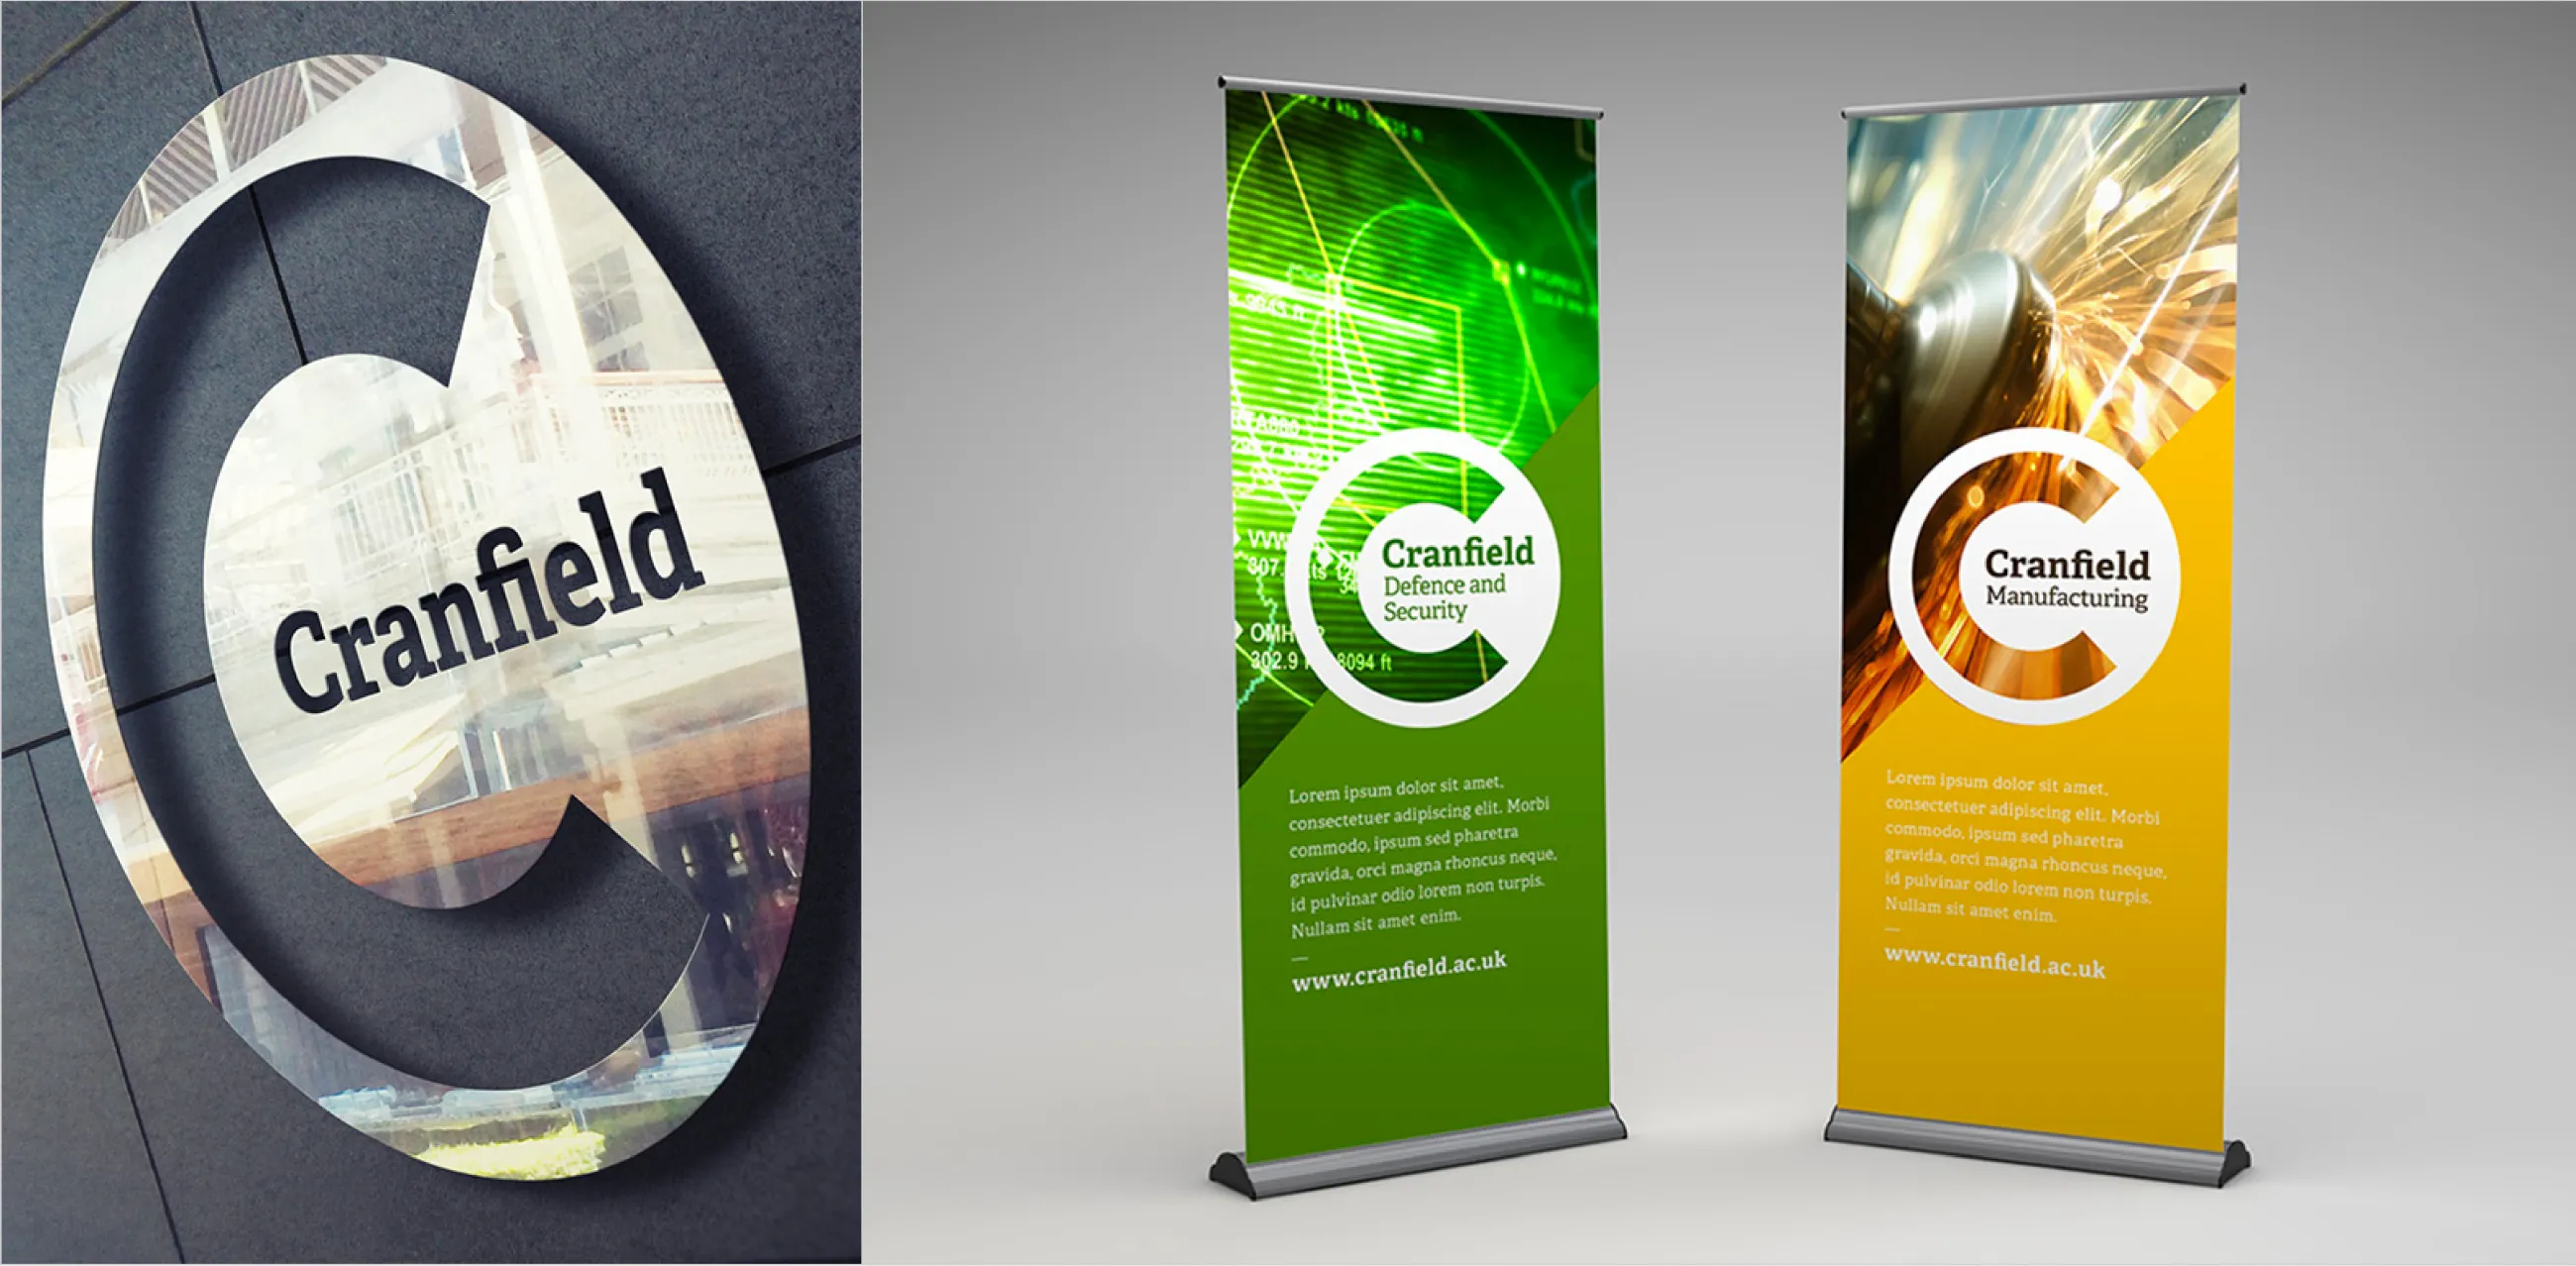 Cranfield University new logo roundel shown as chrome building signage, and branded banner stands